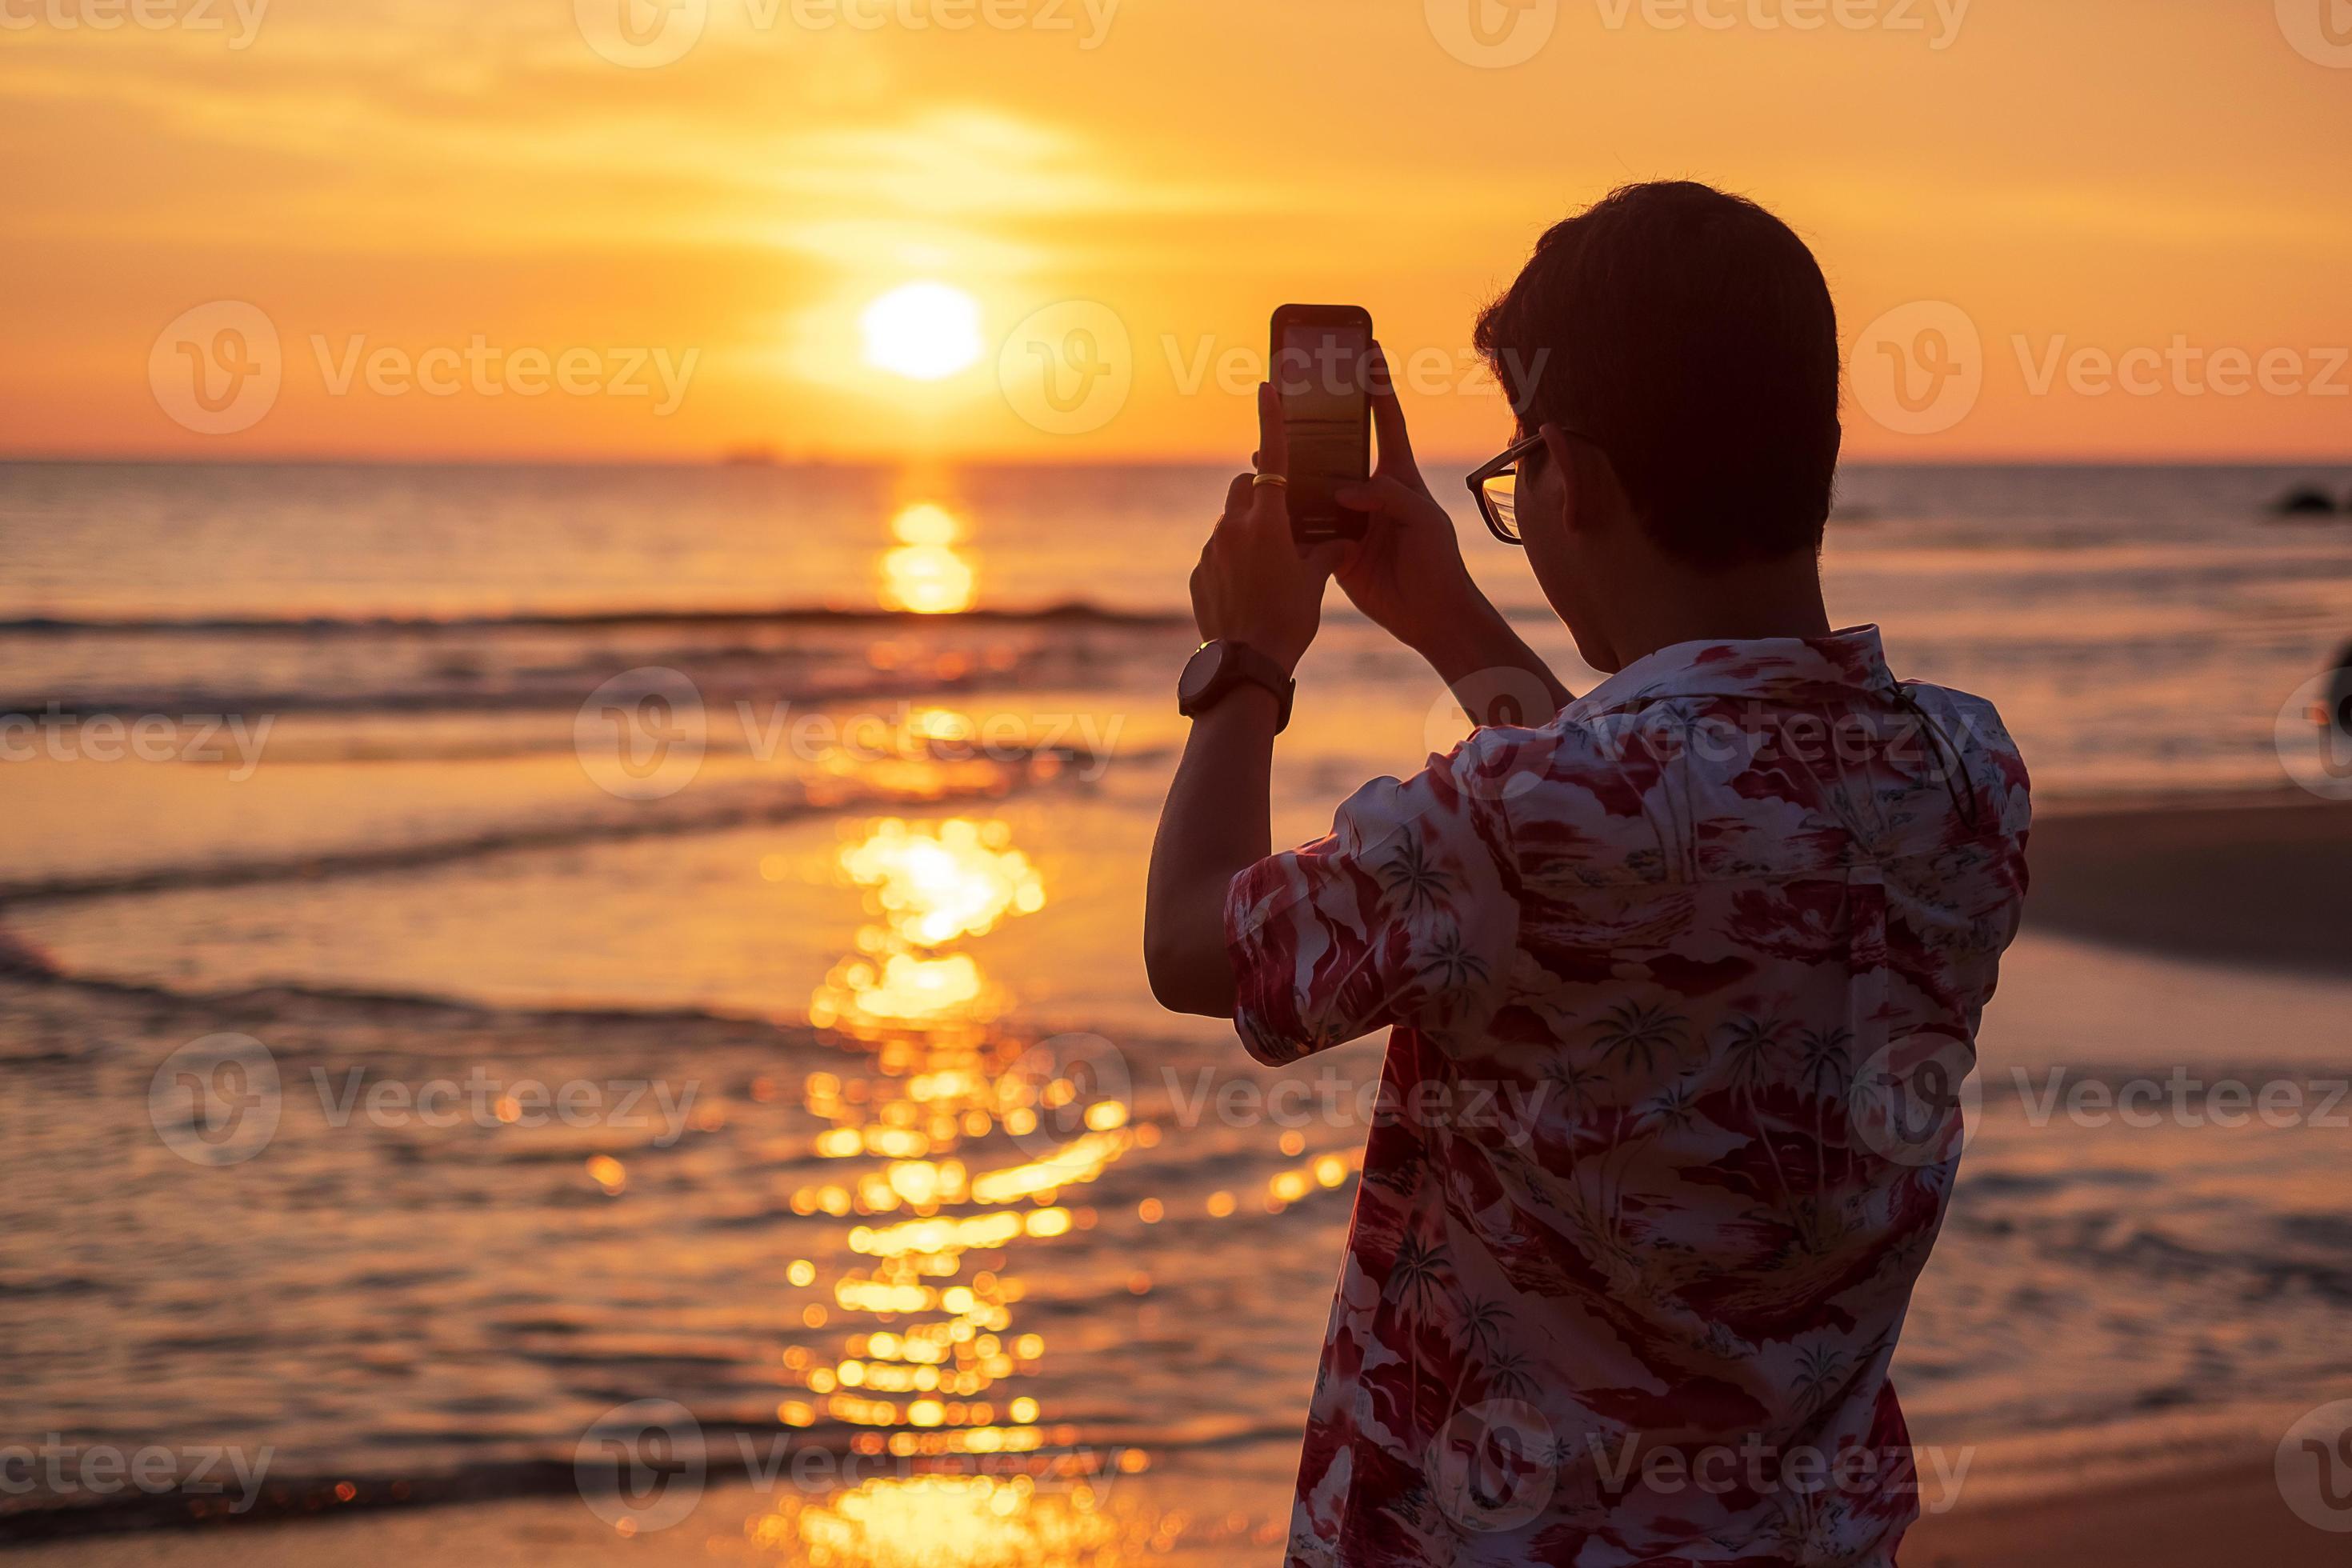 A Person Enjoying The Beach View of the Sunset · Free Stock Photo